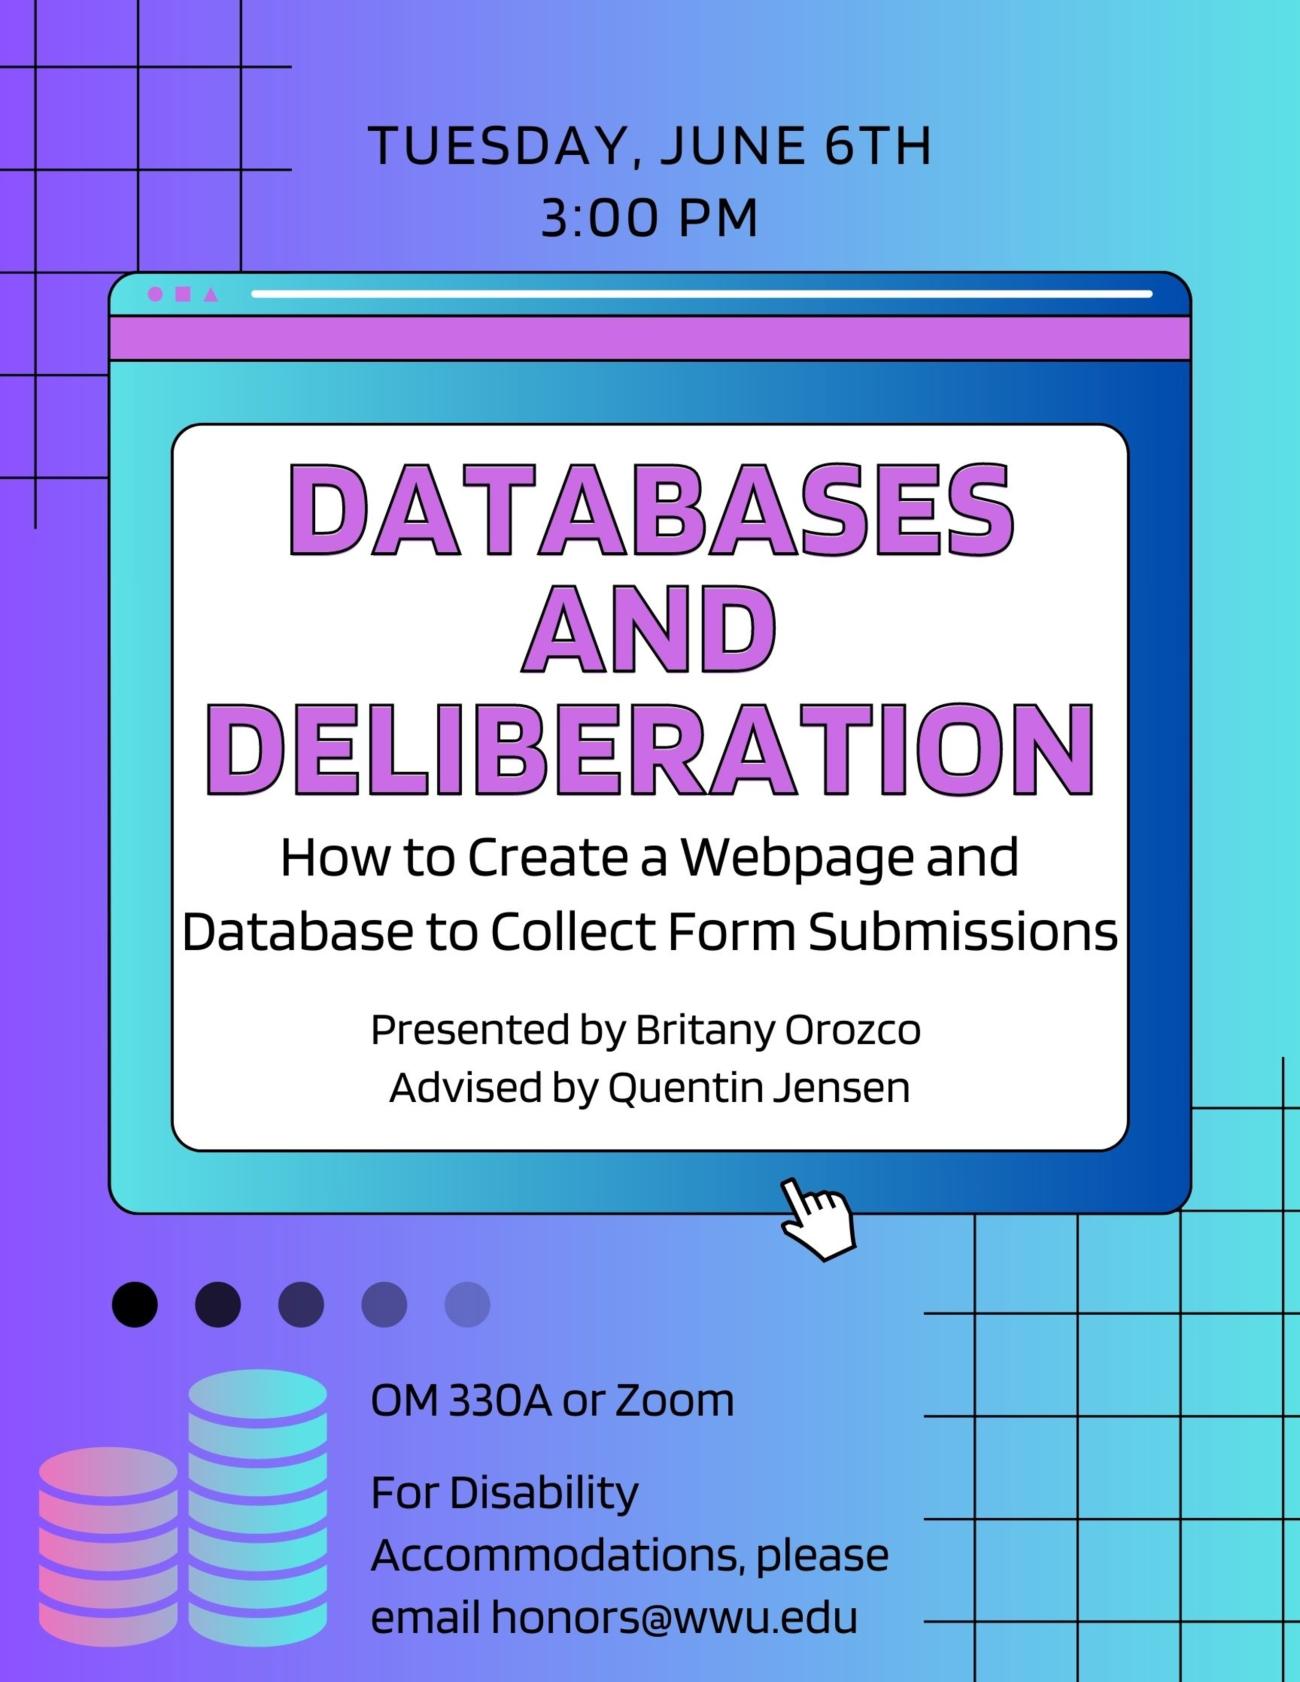 A poster with a purple and teal gradient background with black grid decals and the text "Tuesday, June 6th 3:00 pm" above a center browser window containing the text "Databases and Deliberation: How to Create a Webpage and Database to Collect Form Submissions, Presented by Britany Orozco, Advised by Quentin Jensen" and a cursor. Below, decorative black dots with varying opacity and a pink and cyan database icon surround the text "OM 330A or Zoom, For Disability Accommodations please email honors@wwu.edu".